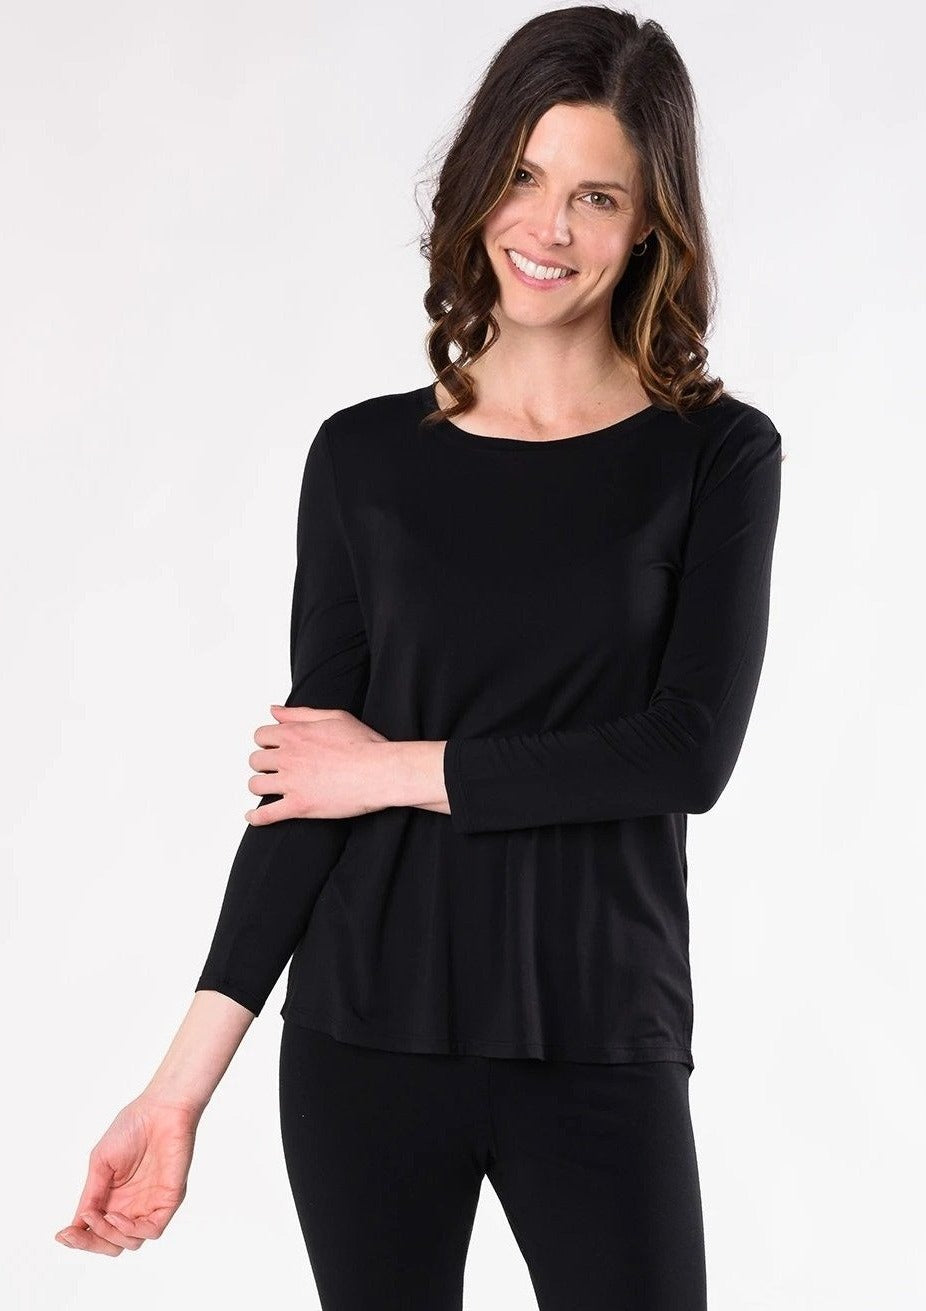 Timelessly designed, the Emmy Crew 3/4 Sleeve Top is made with Terrera's signature viscose from bamboo. This versatile yet classic top features an elegant crew neckline with 3/4 length sleeves. Easily dress up or down in this wardrobe staple. Fabrication: 95% Viscose from Bamboo 5% Spandex TERRERA $60.00 Black